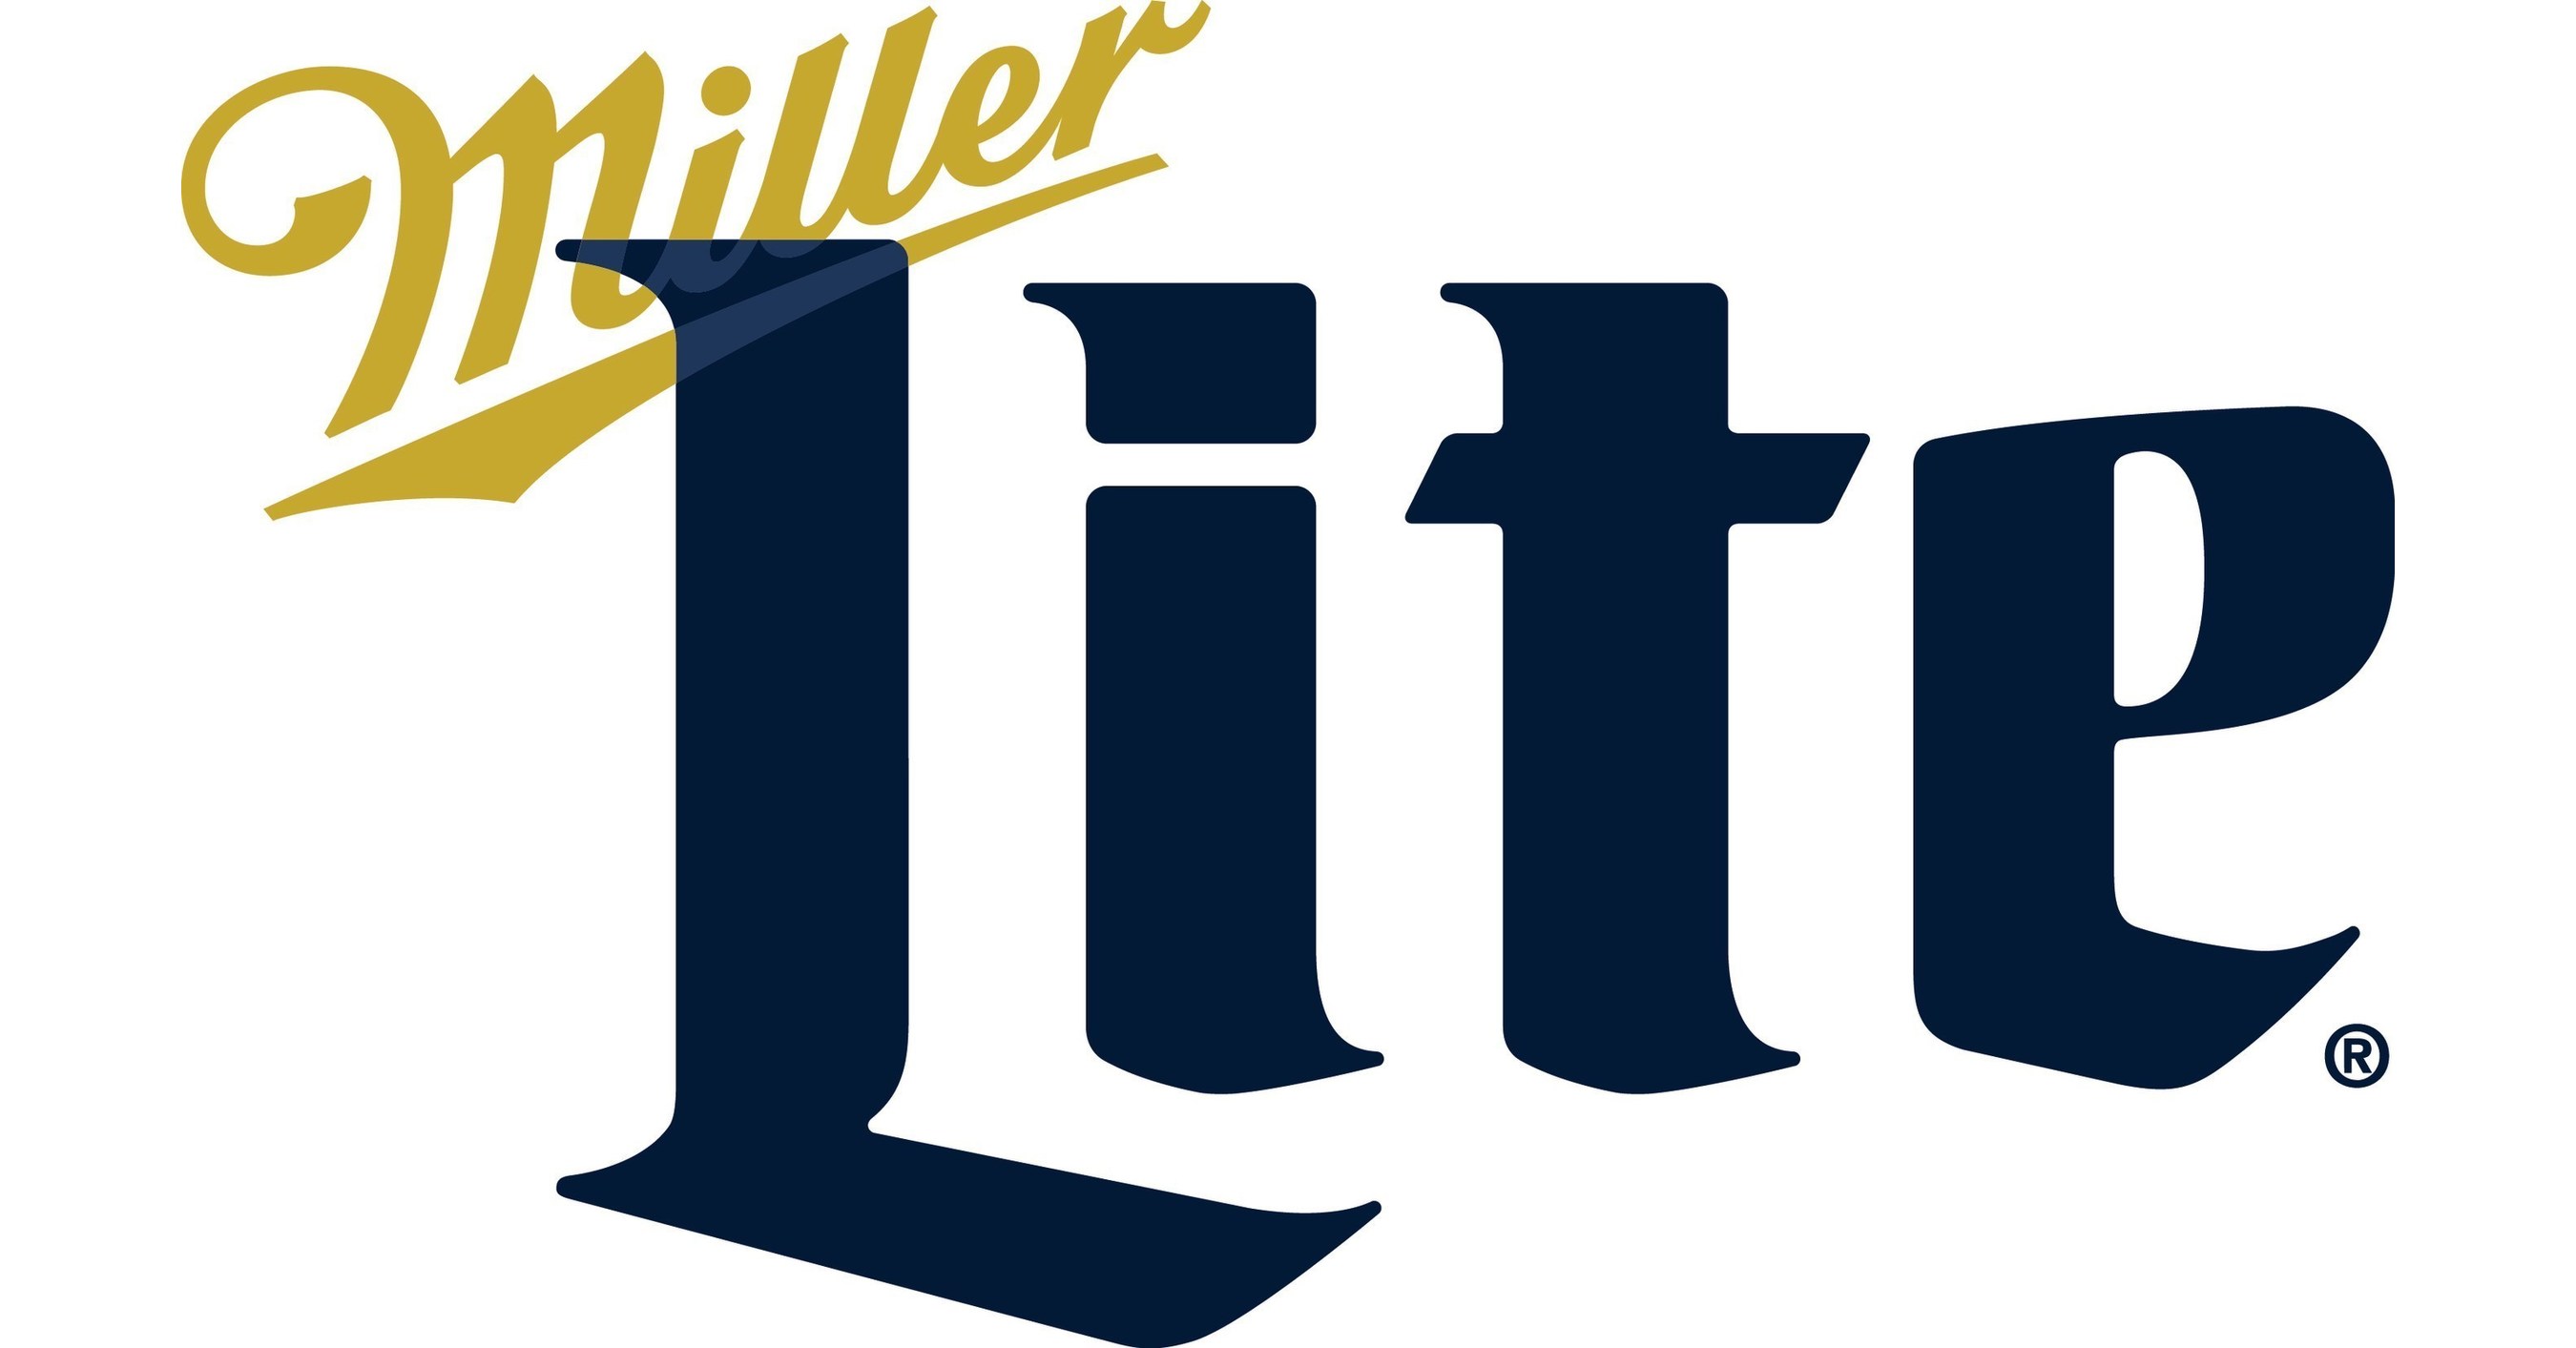 Miller Lite® Launches FirstEver Beer Cantenna For Football Season